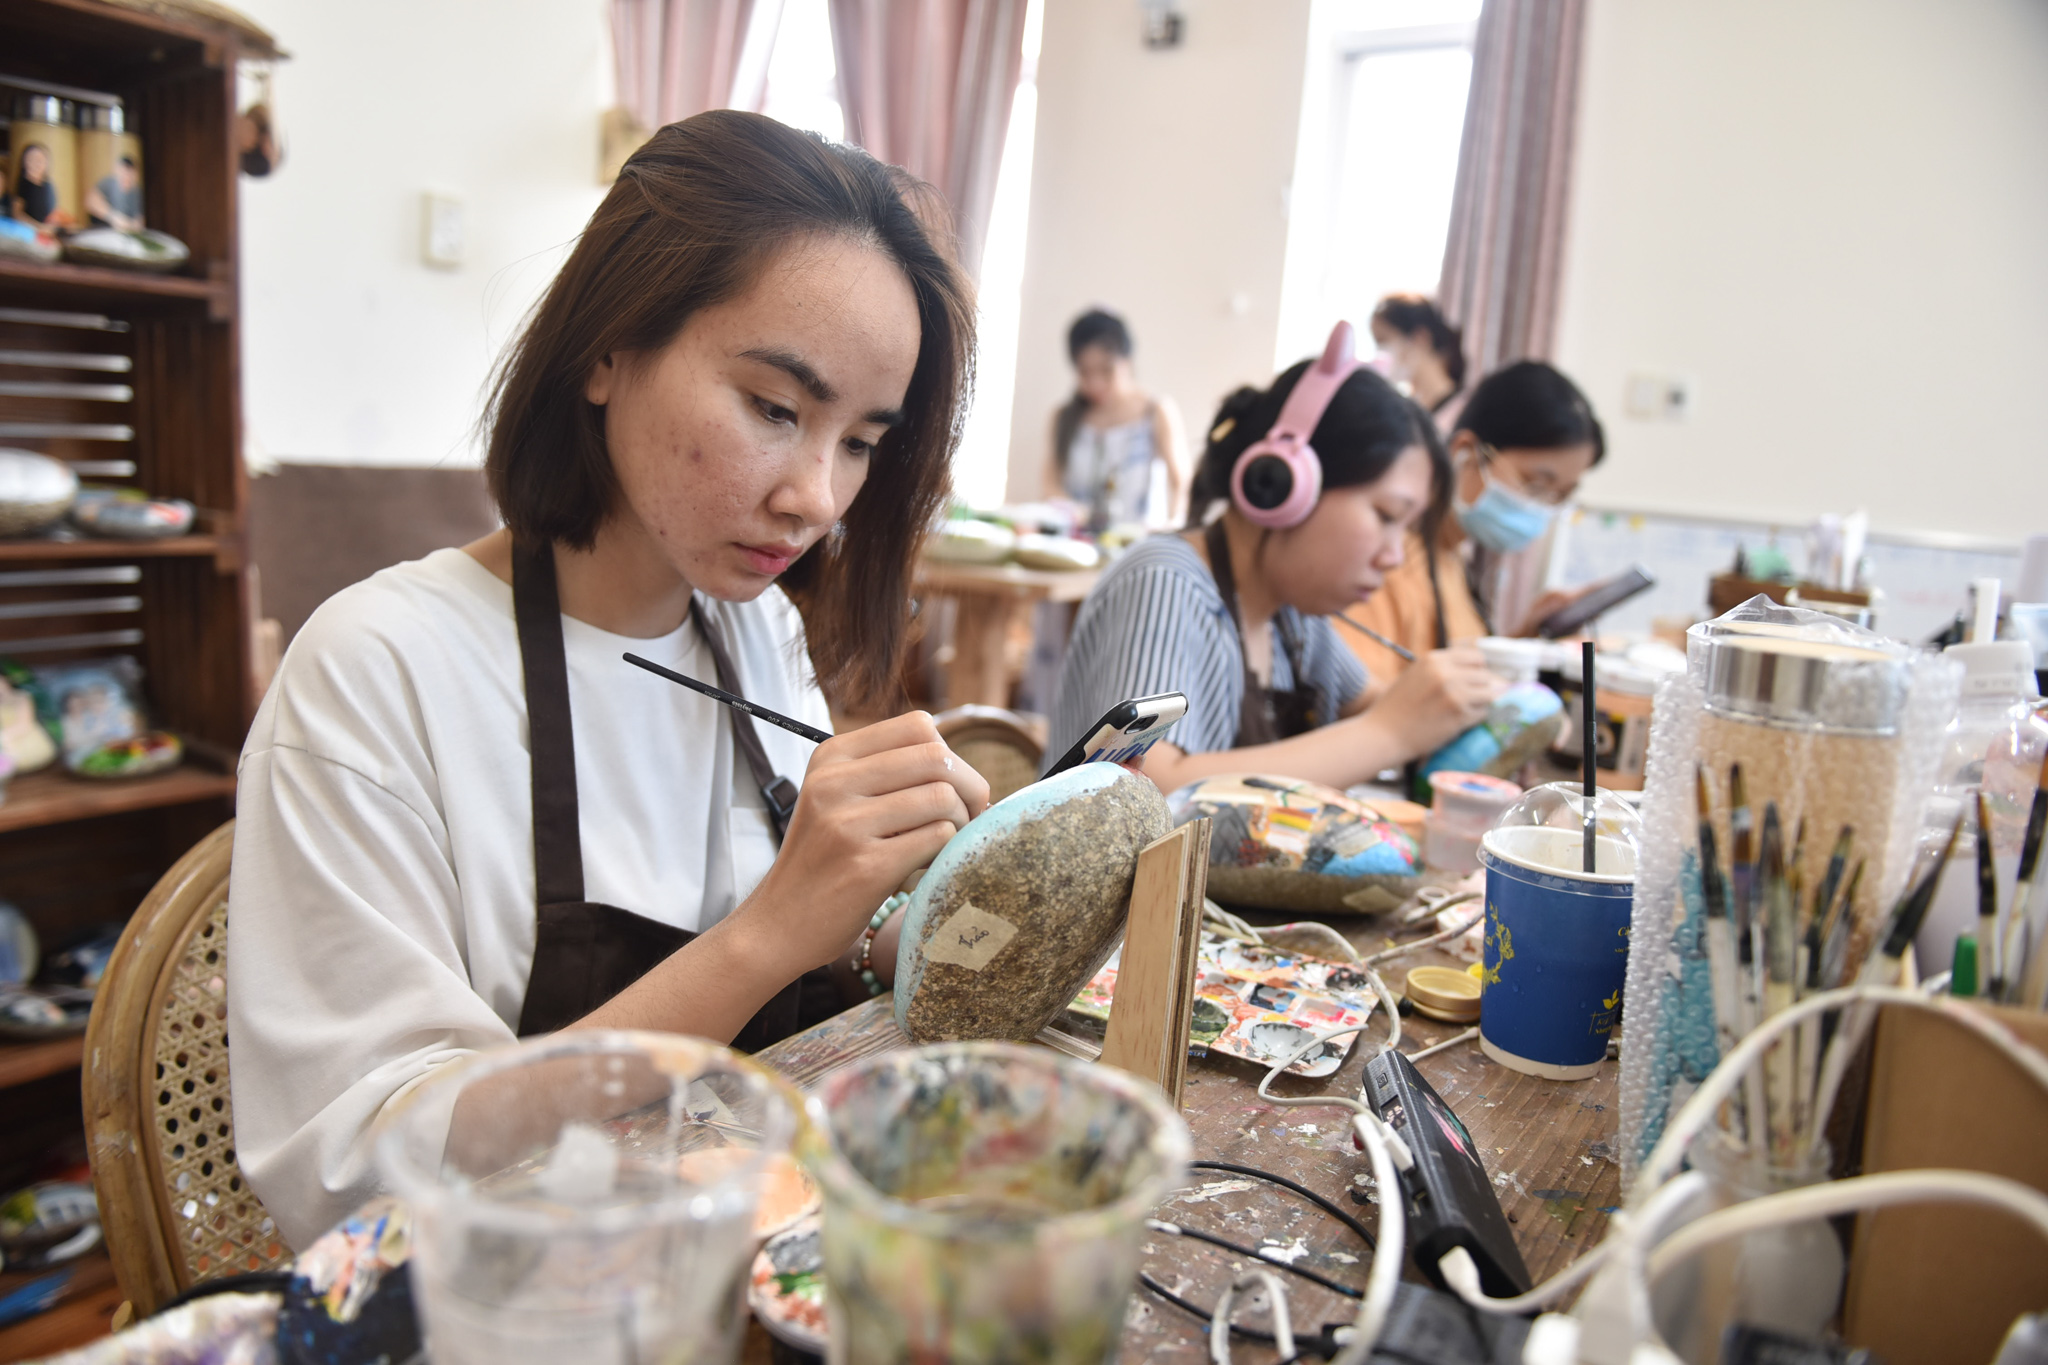 Artists are working on pebble paintings at Sỏi Nghệ Thuật - G.Art at Thao Dien Ward, Thu Duc City Ho Chi Minh City. Photo: Ngoc Phuong / Tuoi Tre